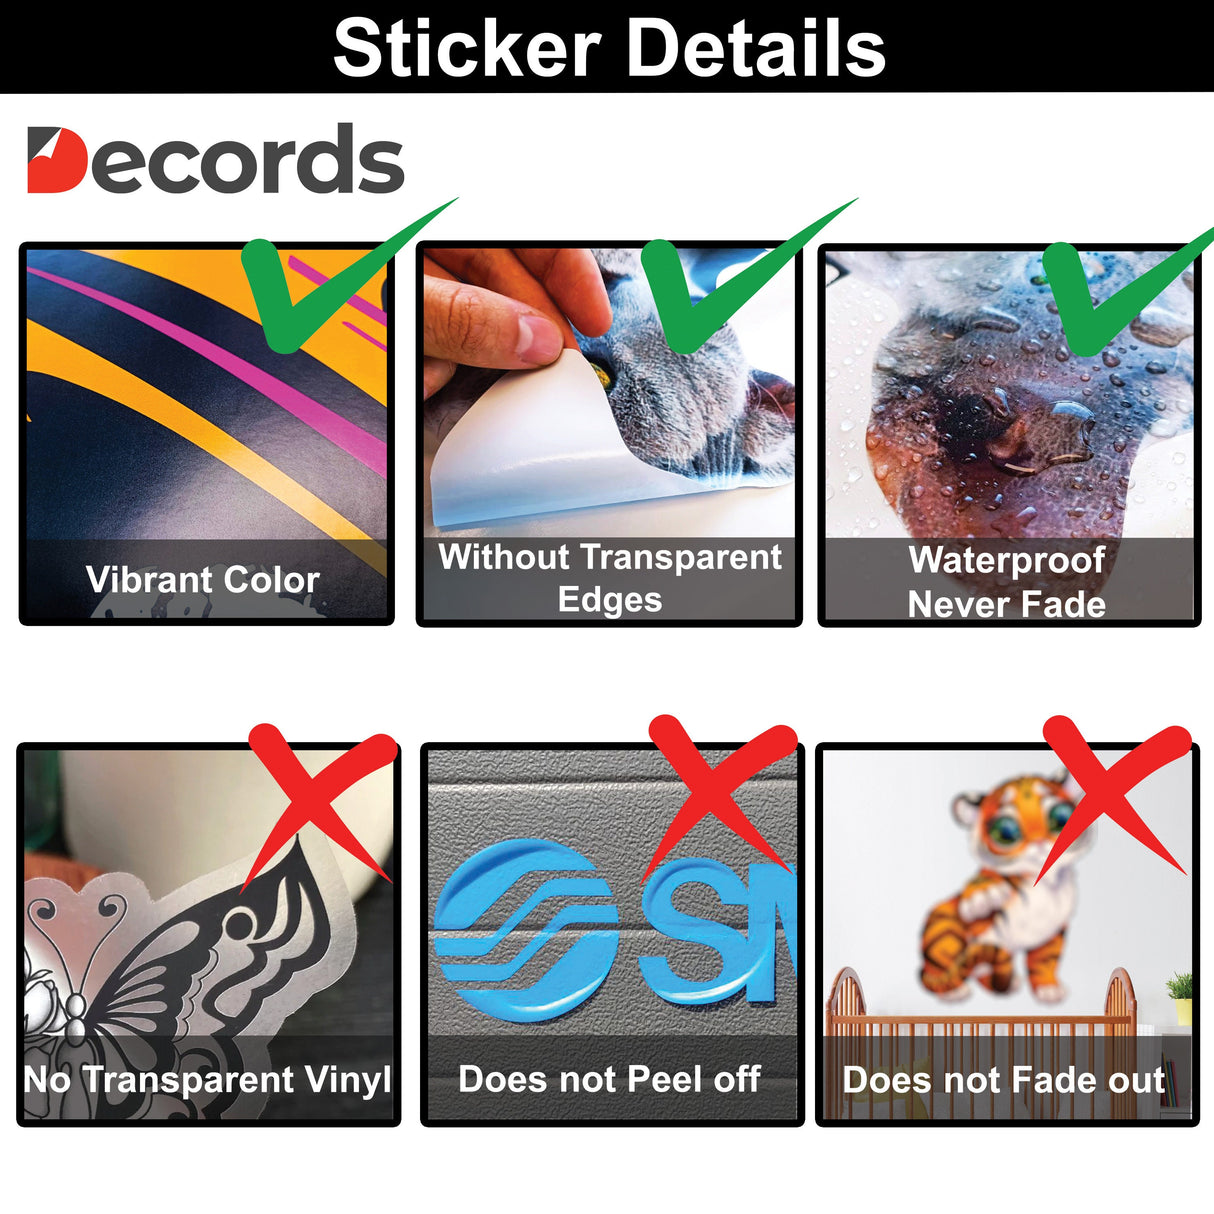 Allergy Alert Stickers - Peanut Sensitivity Warning Labels for Safety